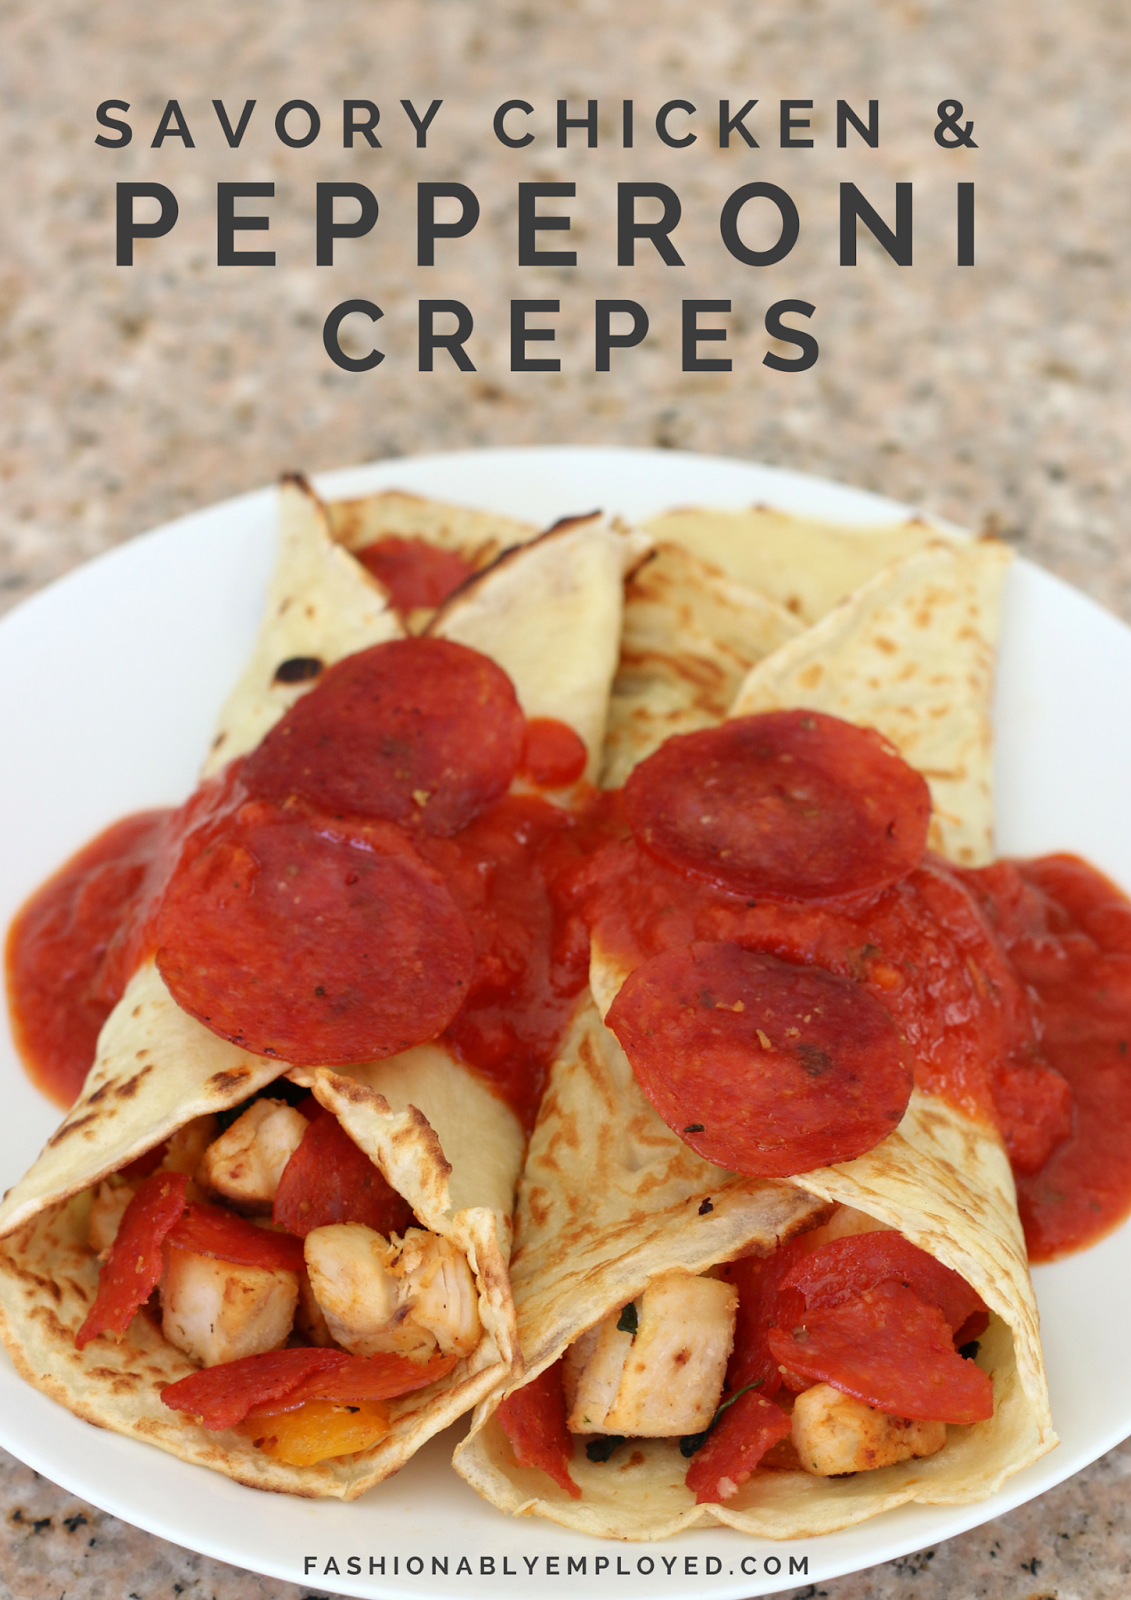 FashionablyEmployed.com | Kid-Friendly "Parisian" Inspired Lunch | Pepperoni & Chicken crepes with spinach and bell peppers, family lunch or dinner, easy meal prep, cook with kids